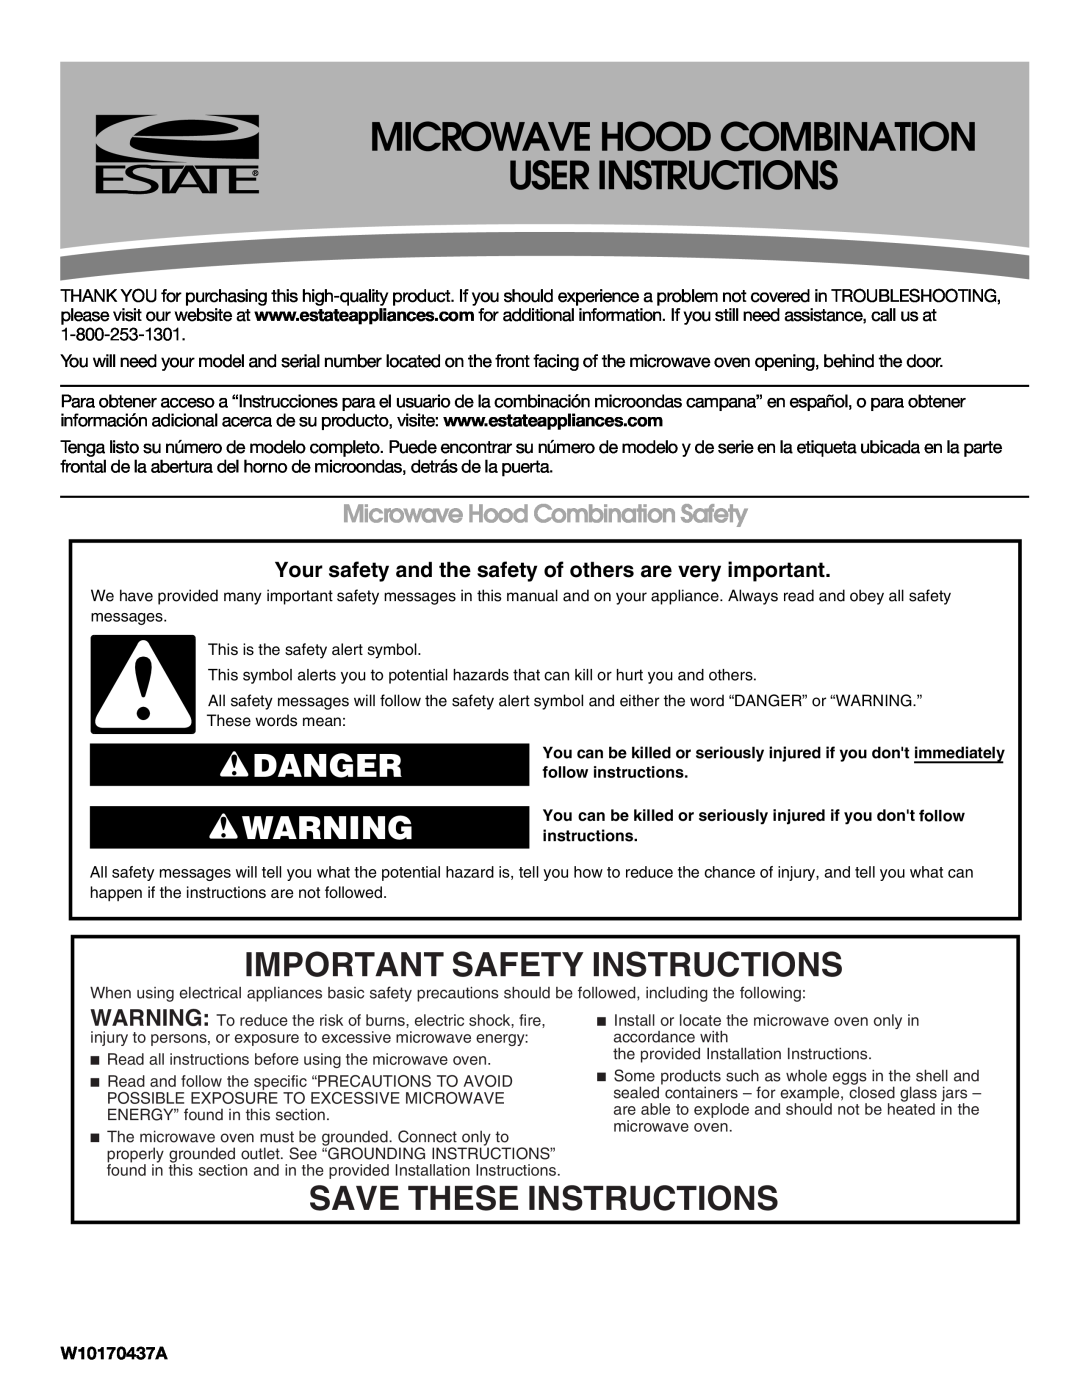 Estate Microwave Hood Combination important safety instructions Important Safety Instructions, Save These Instructions 